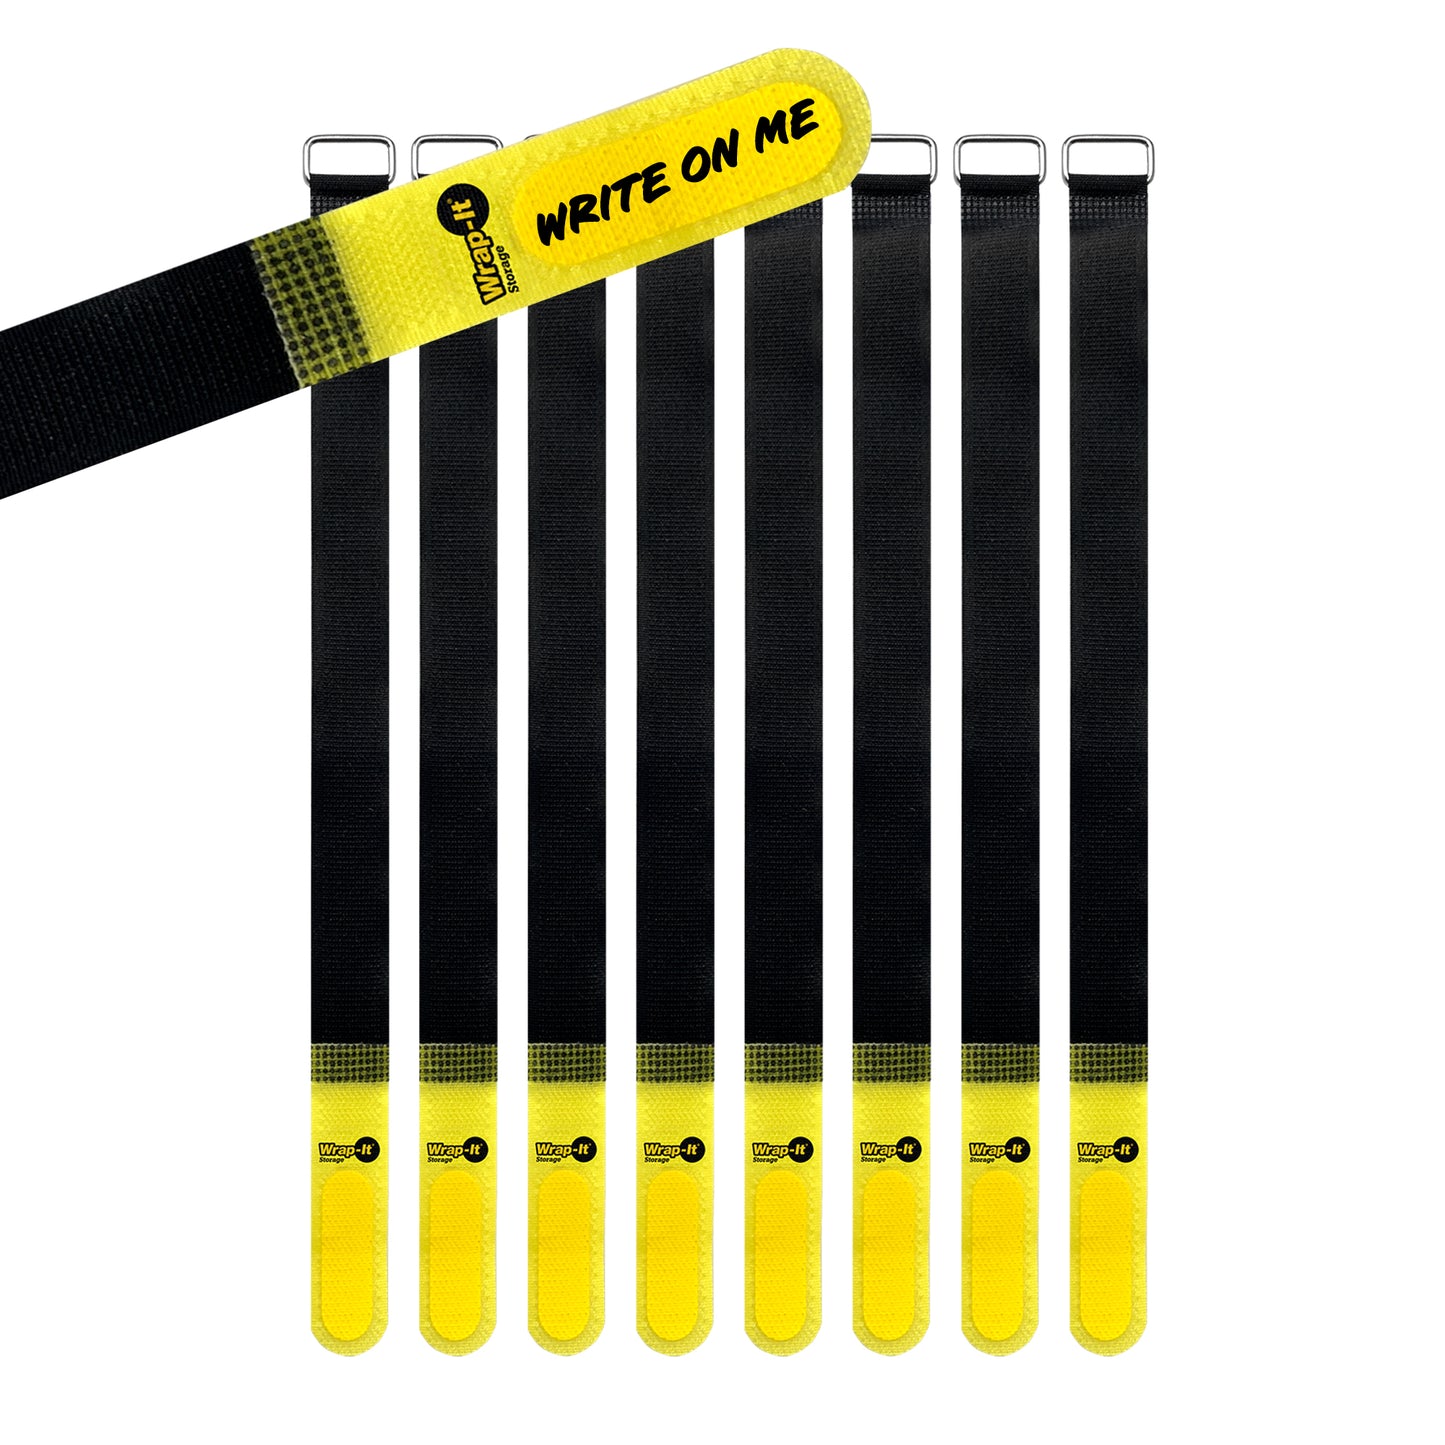 Cinch-Straps - 12-in. (8-Pack) Black/Yellow - Wrap-It Storage